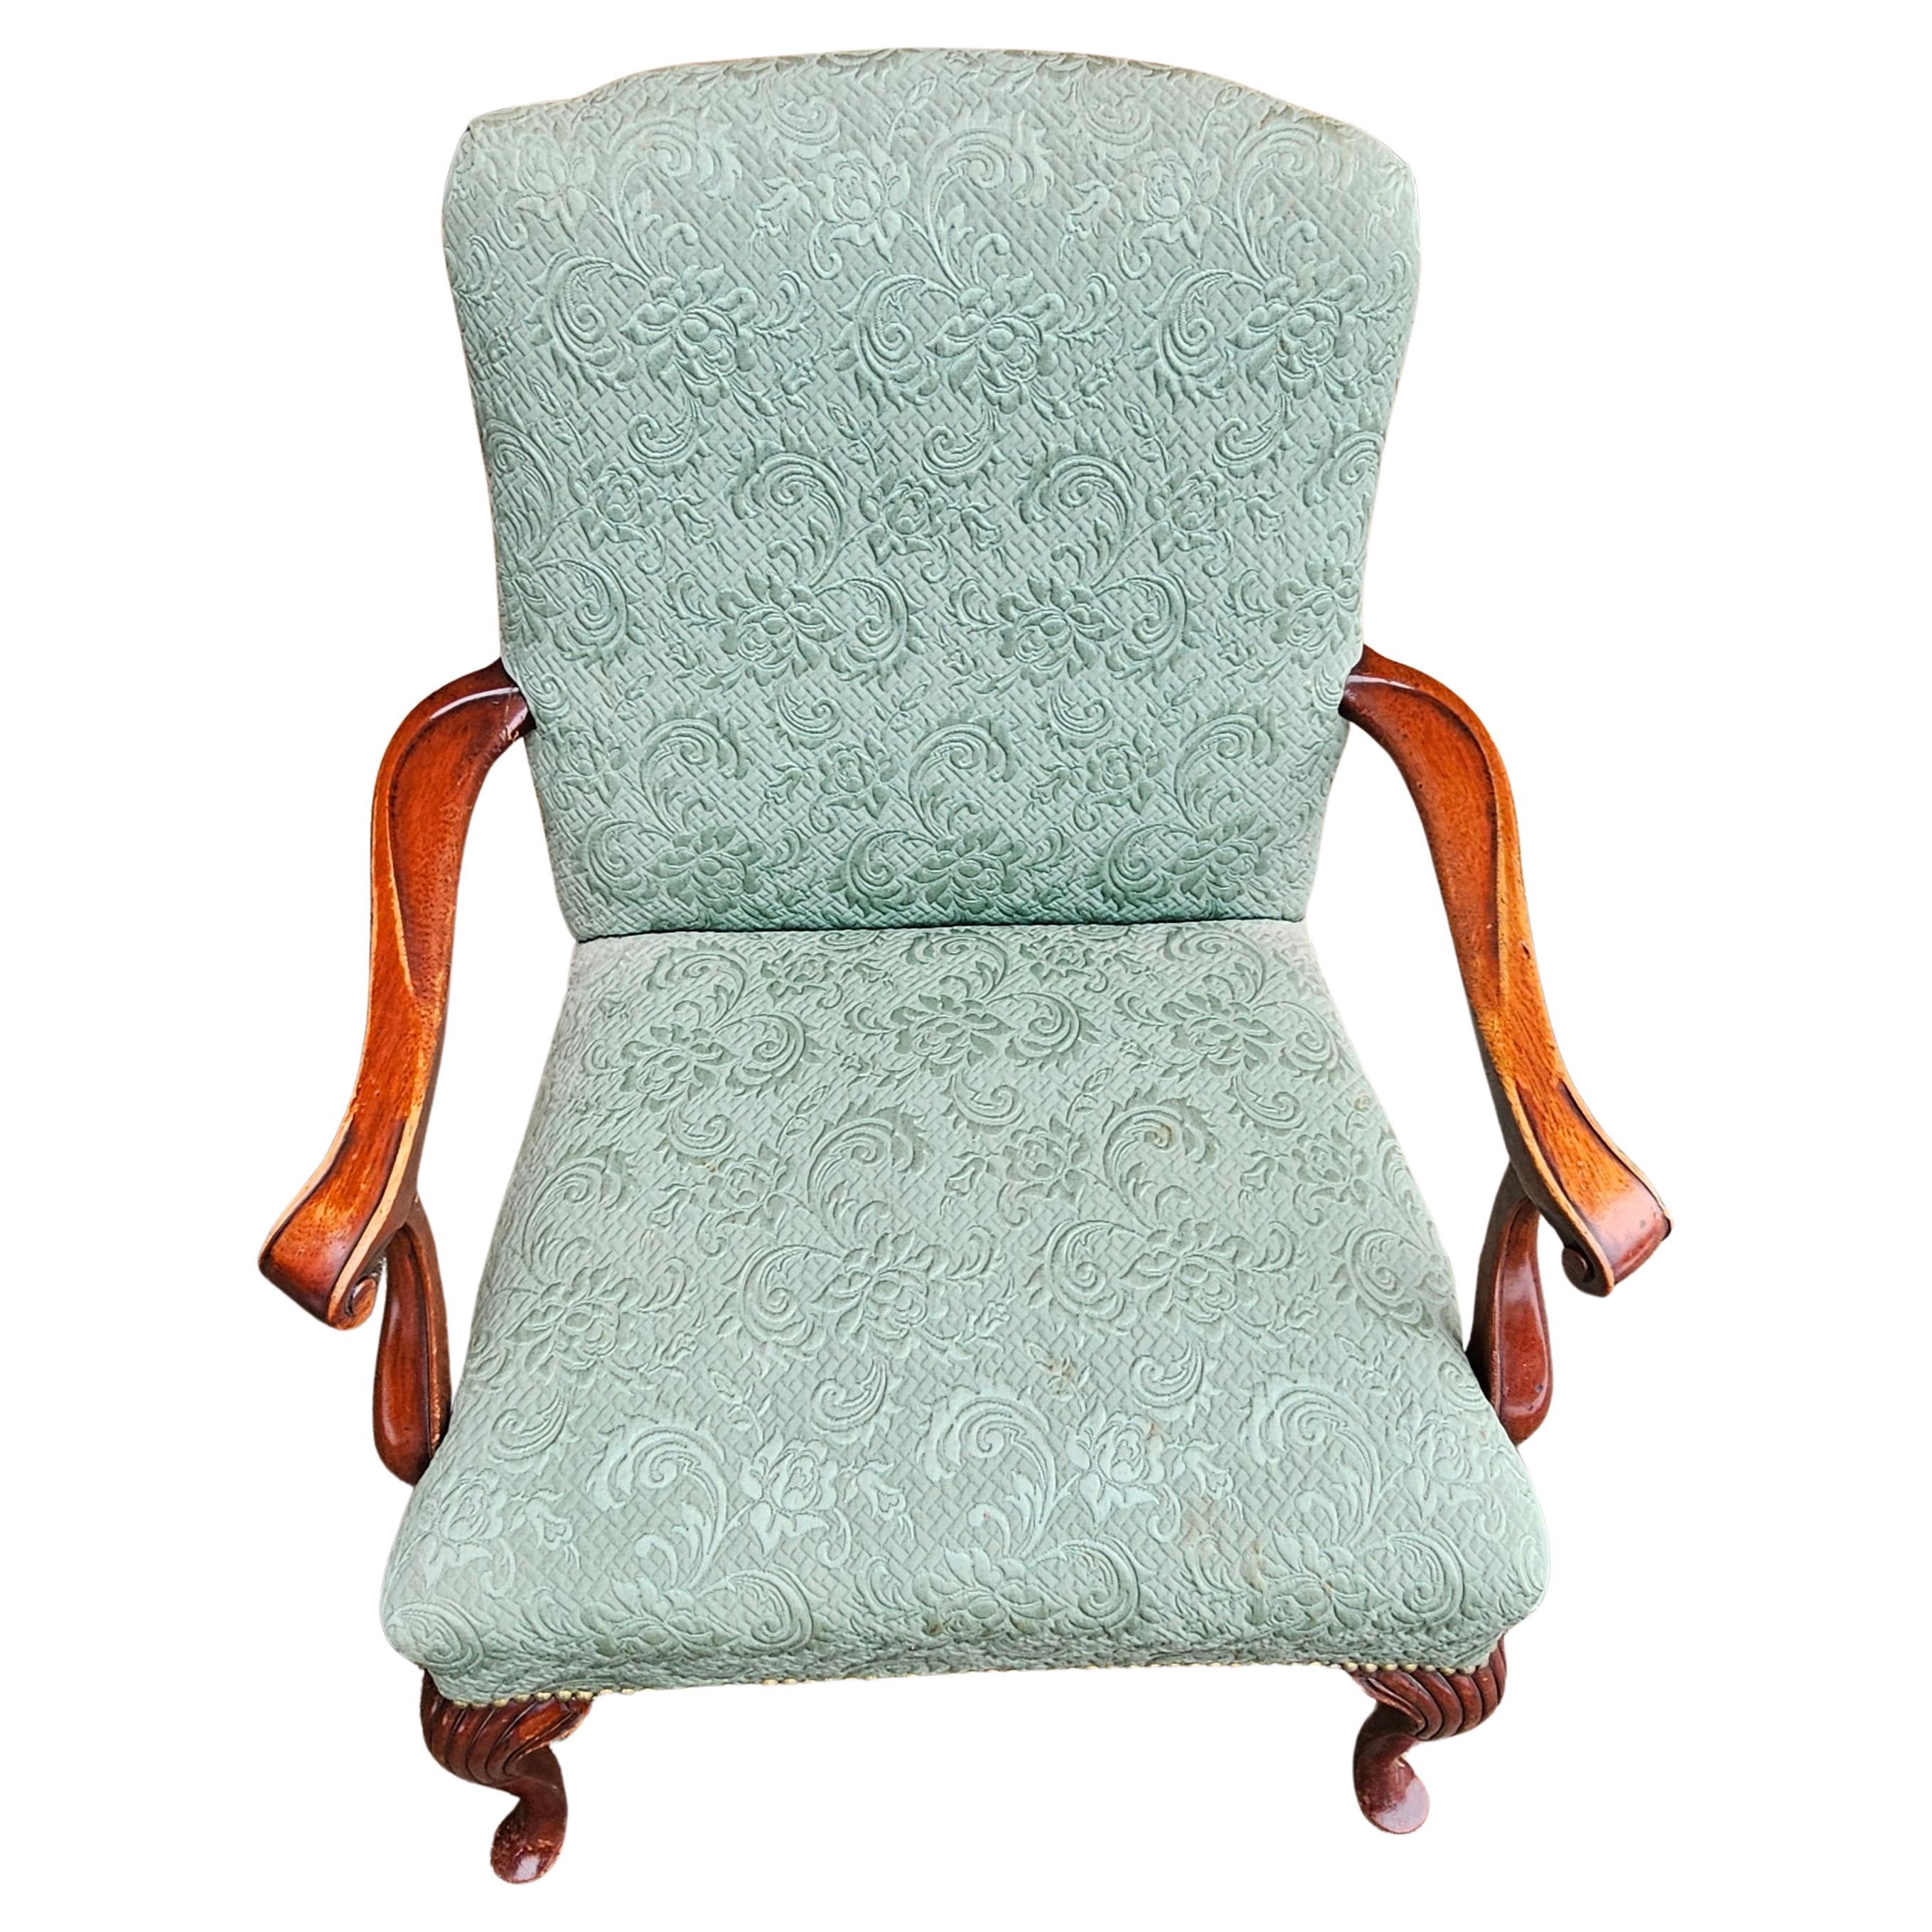 American Mid 20th Century Queen Anne Style Mahogany Upholstered Armchair For Sale